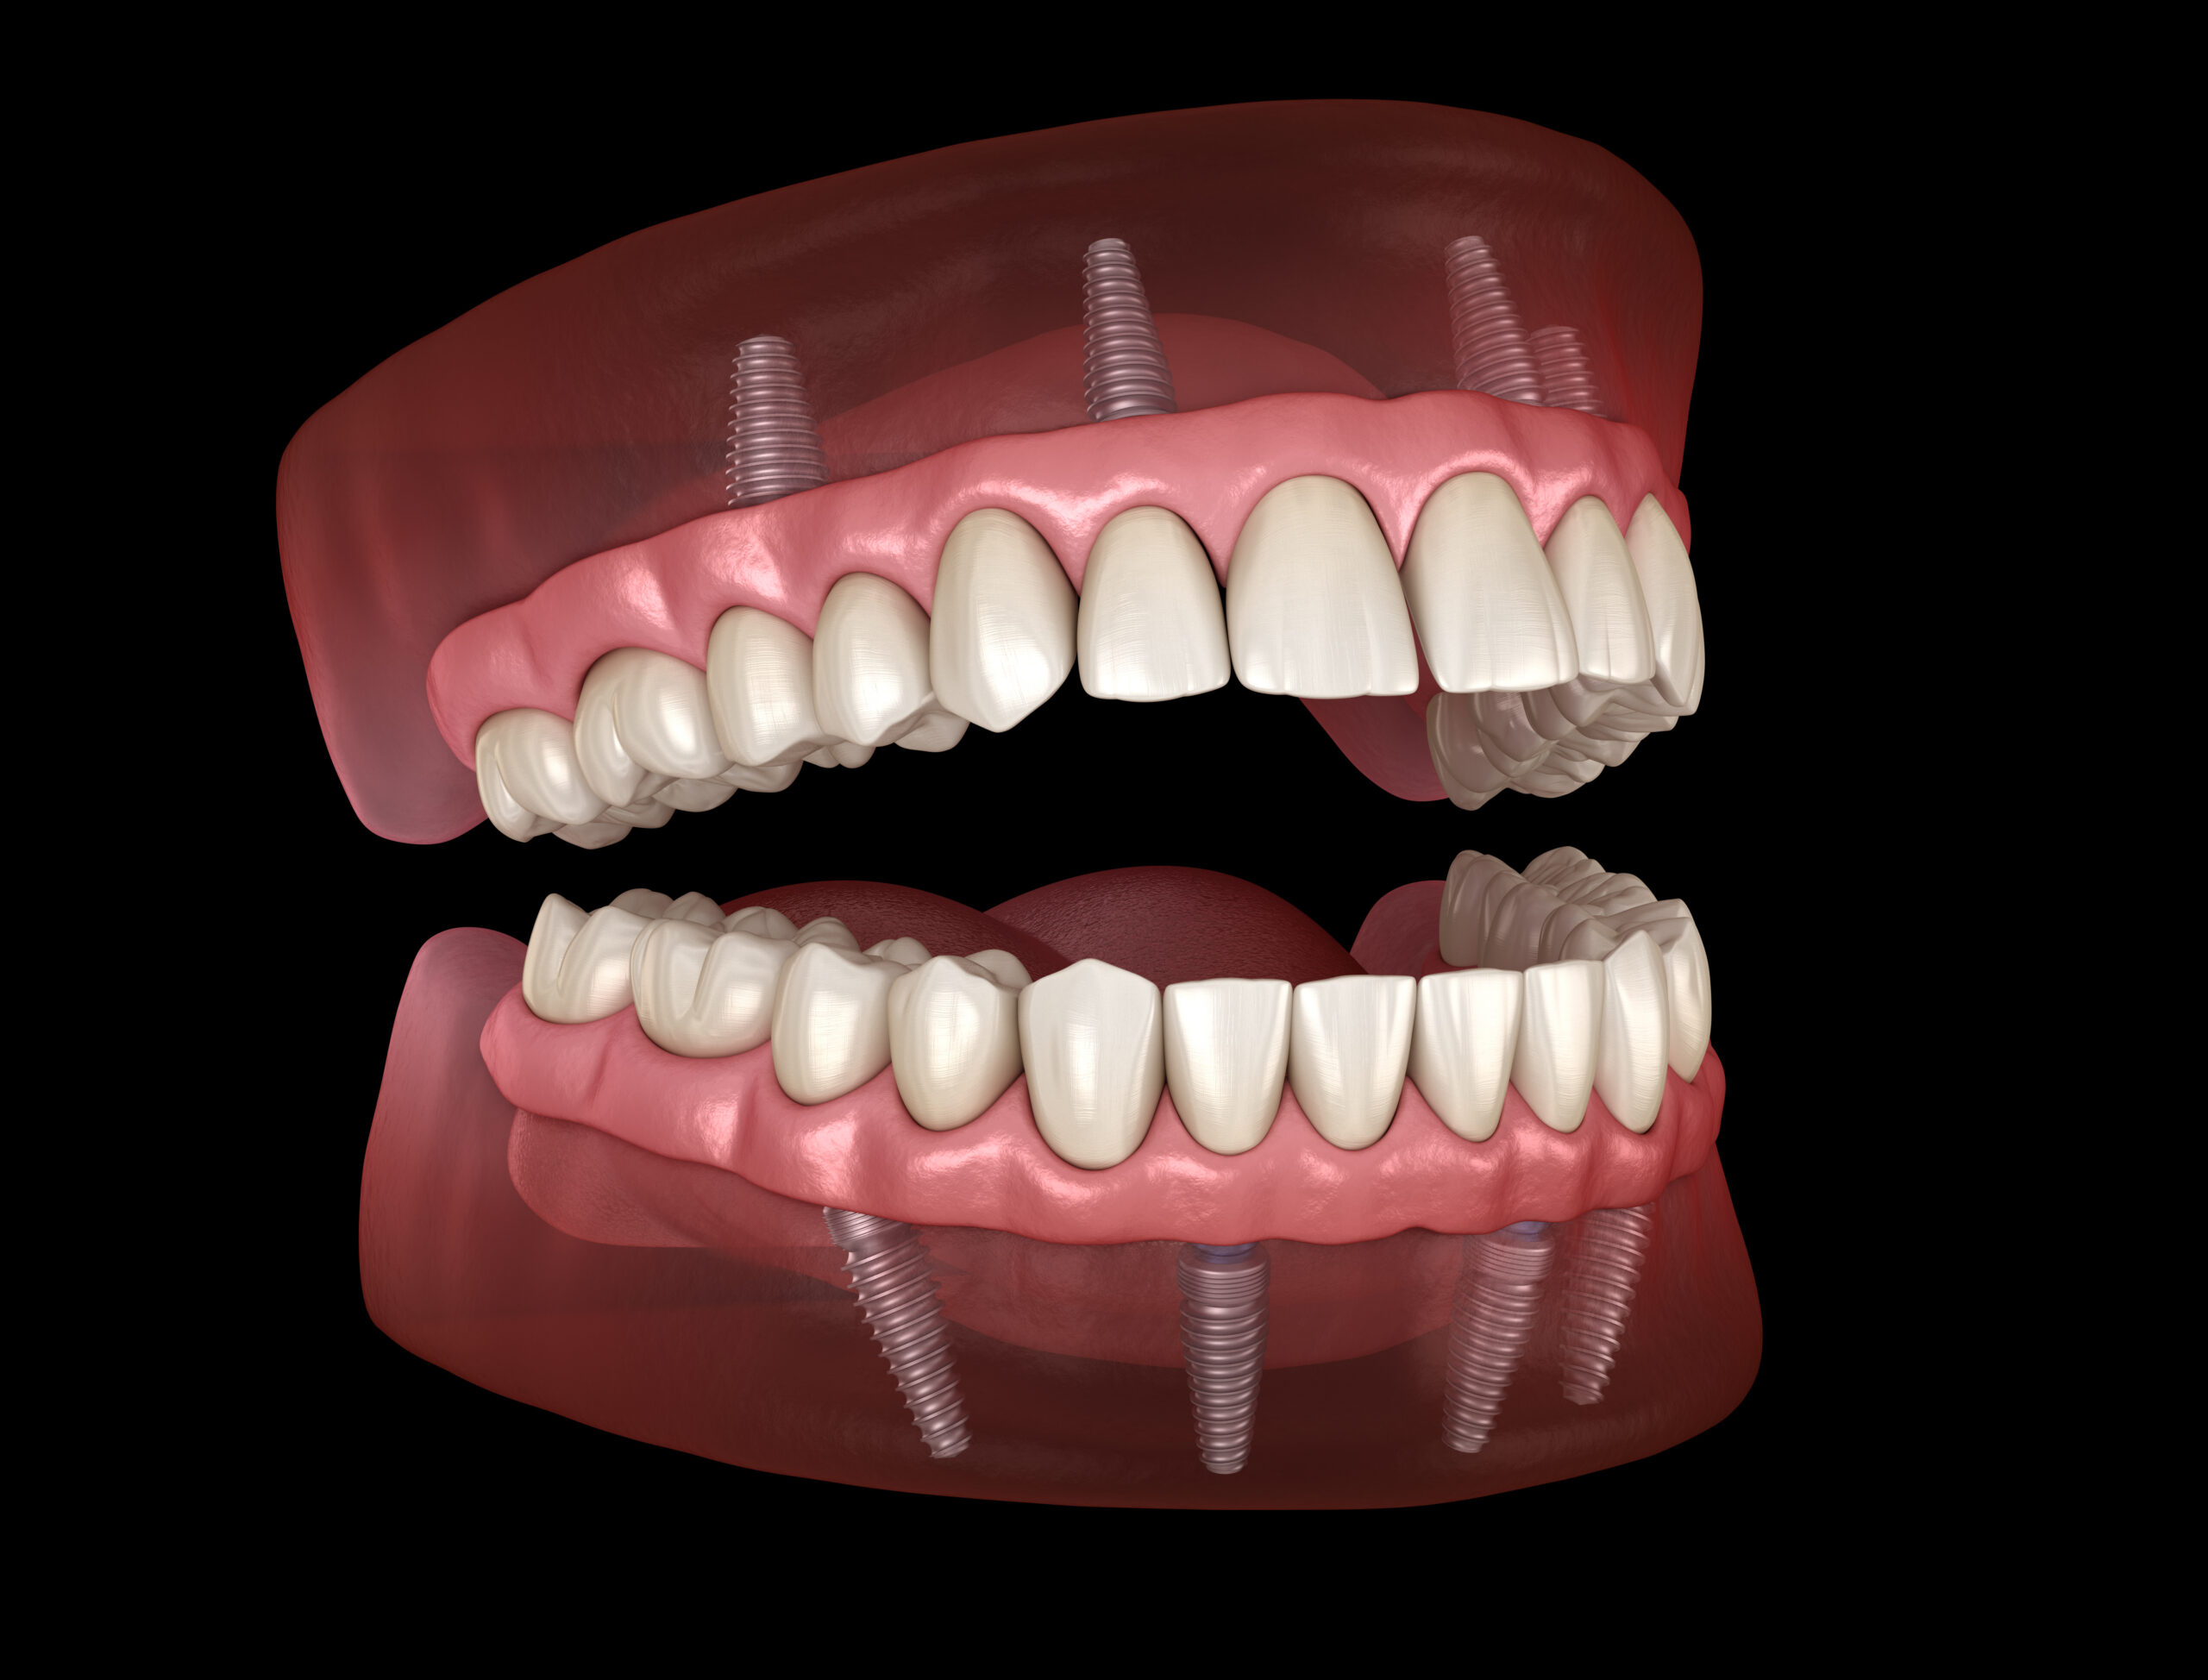 Reasons To Consider Full Mouth Dental Implants In Mission Viejo, CA Over Implant Supported Dentures